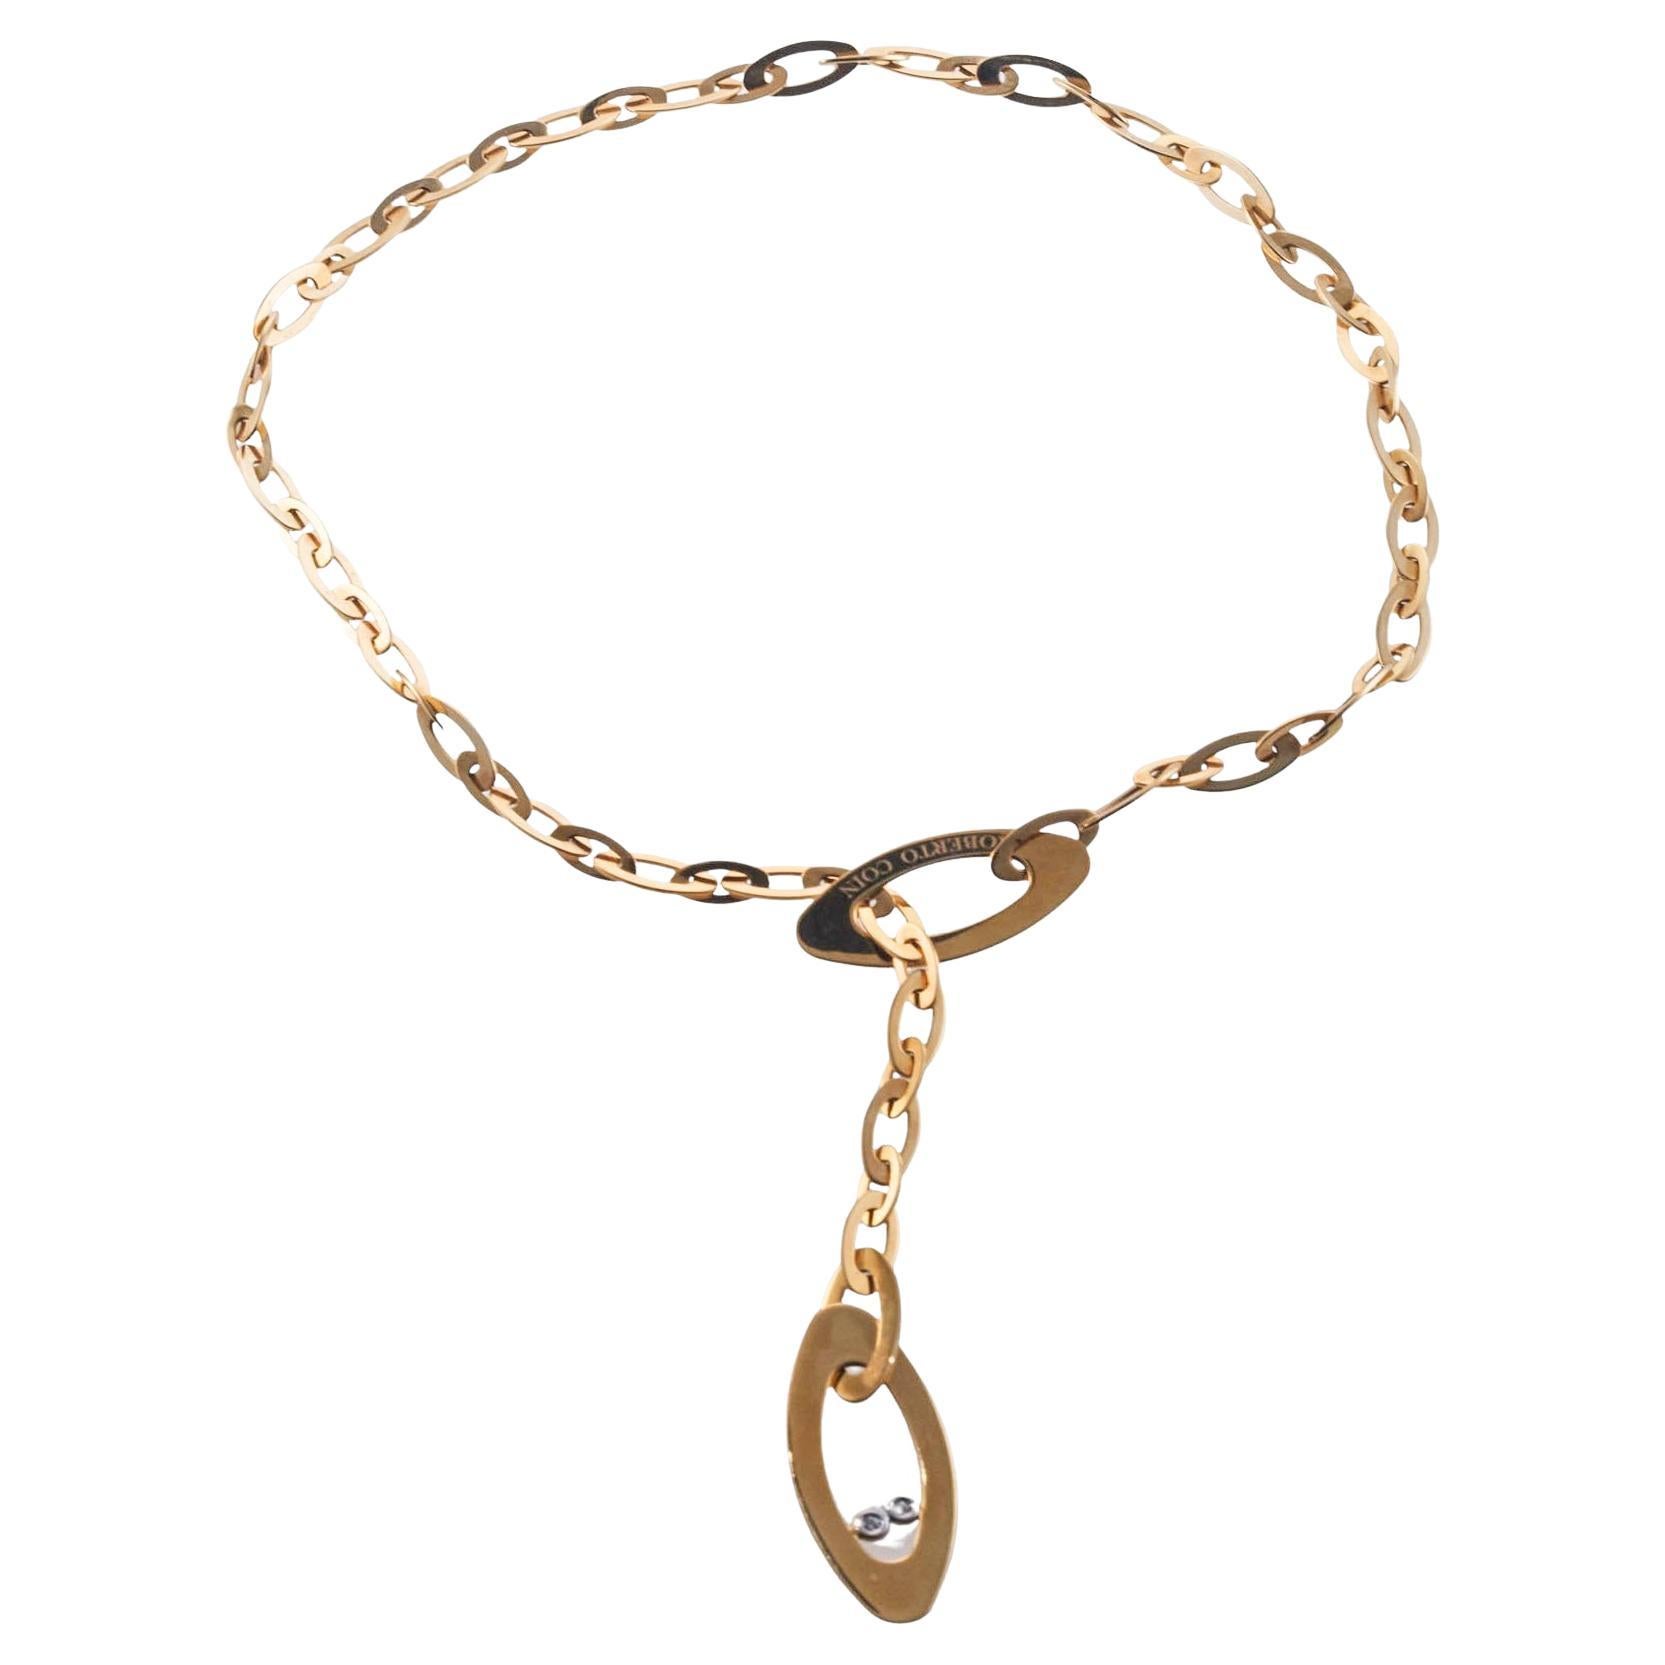 Roberto Coin Chic & Shine Diamond Gold Link Lariat Necklace